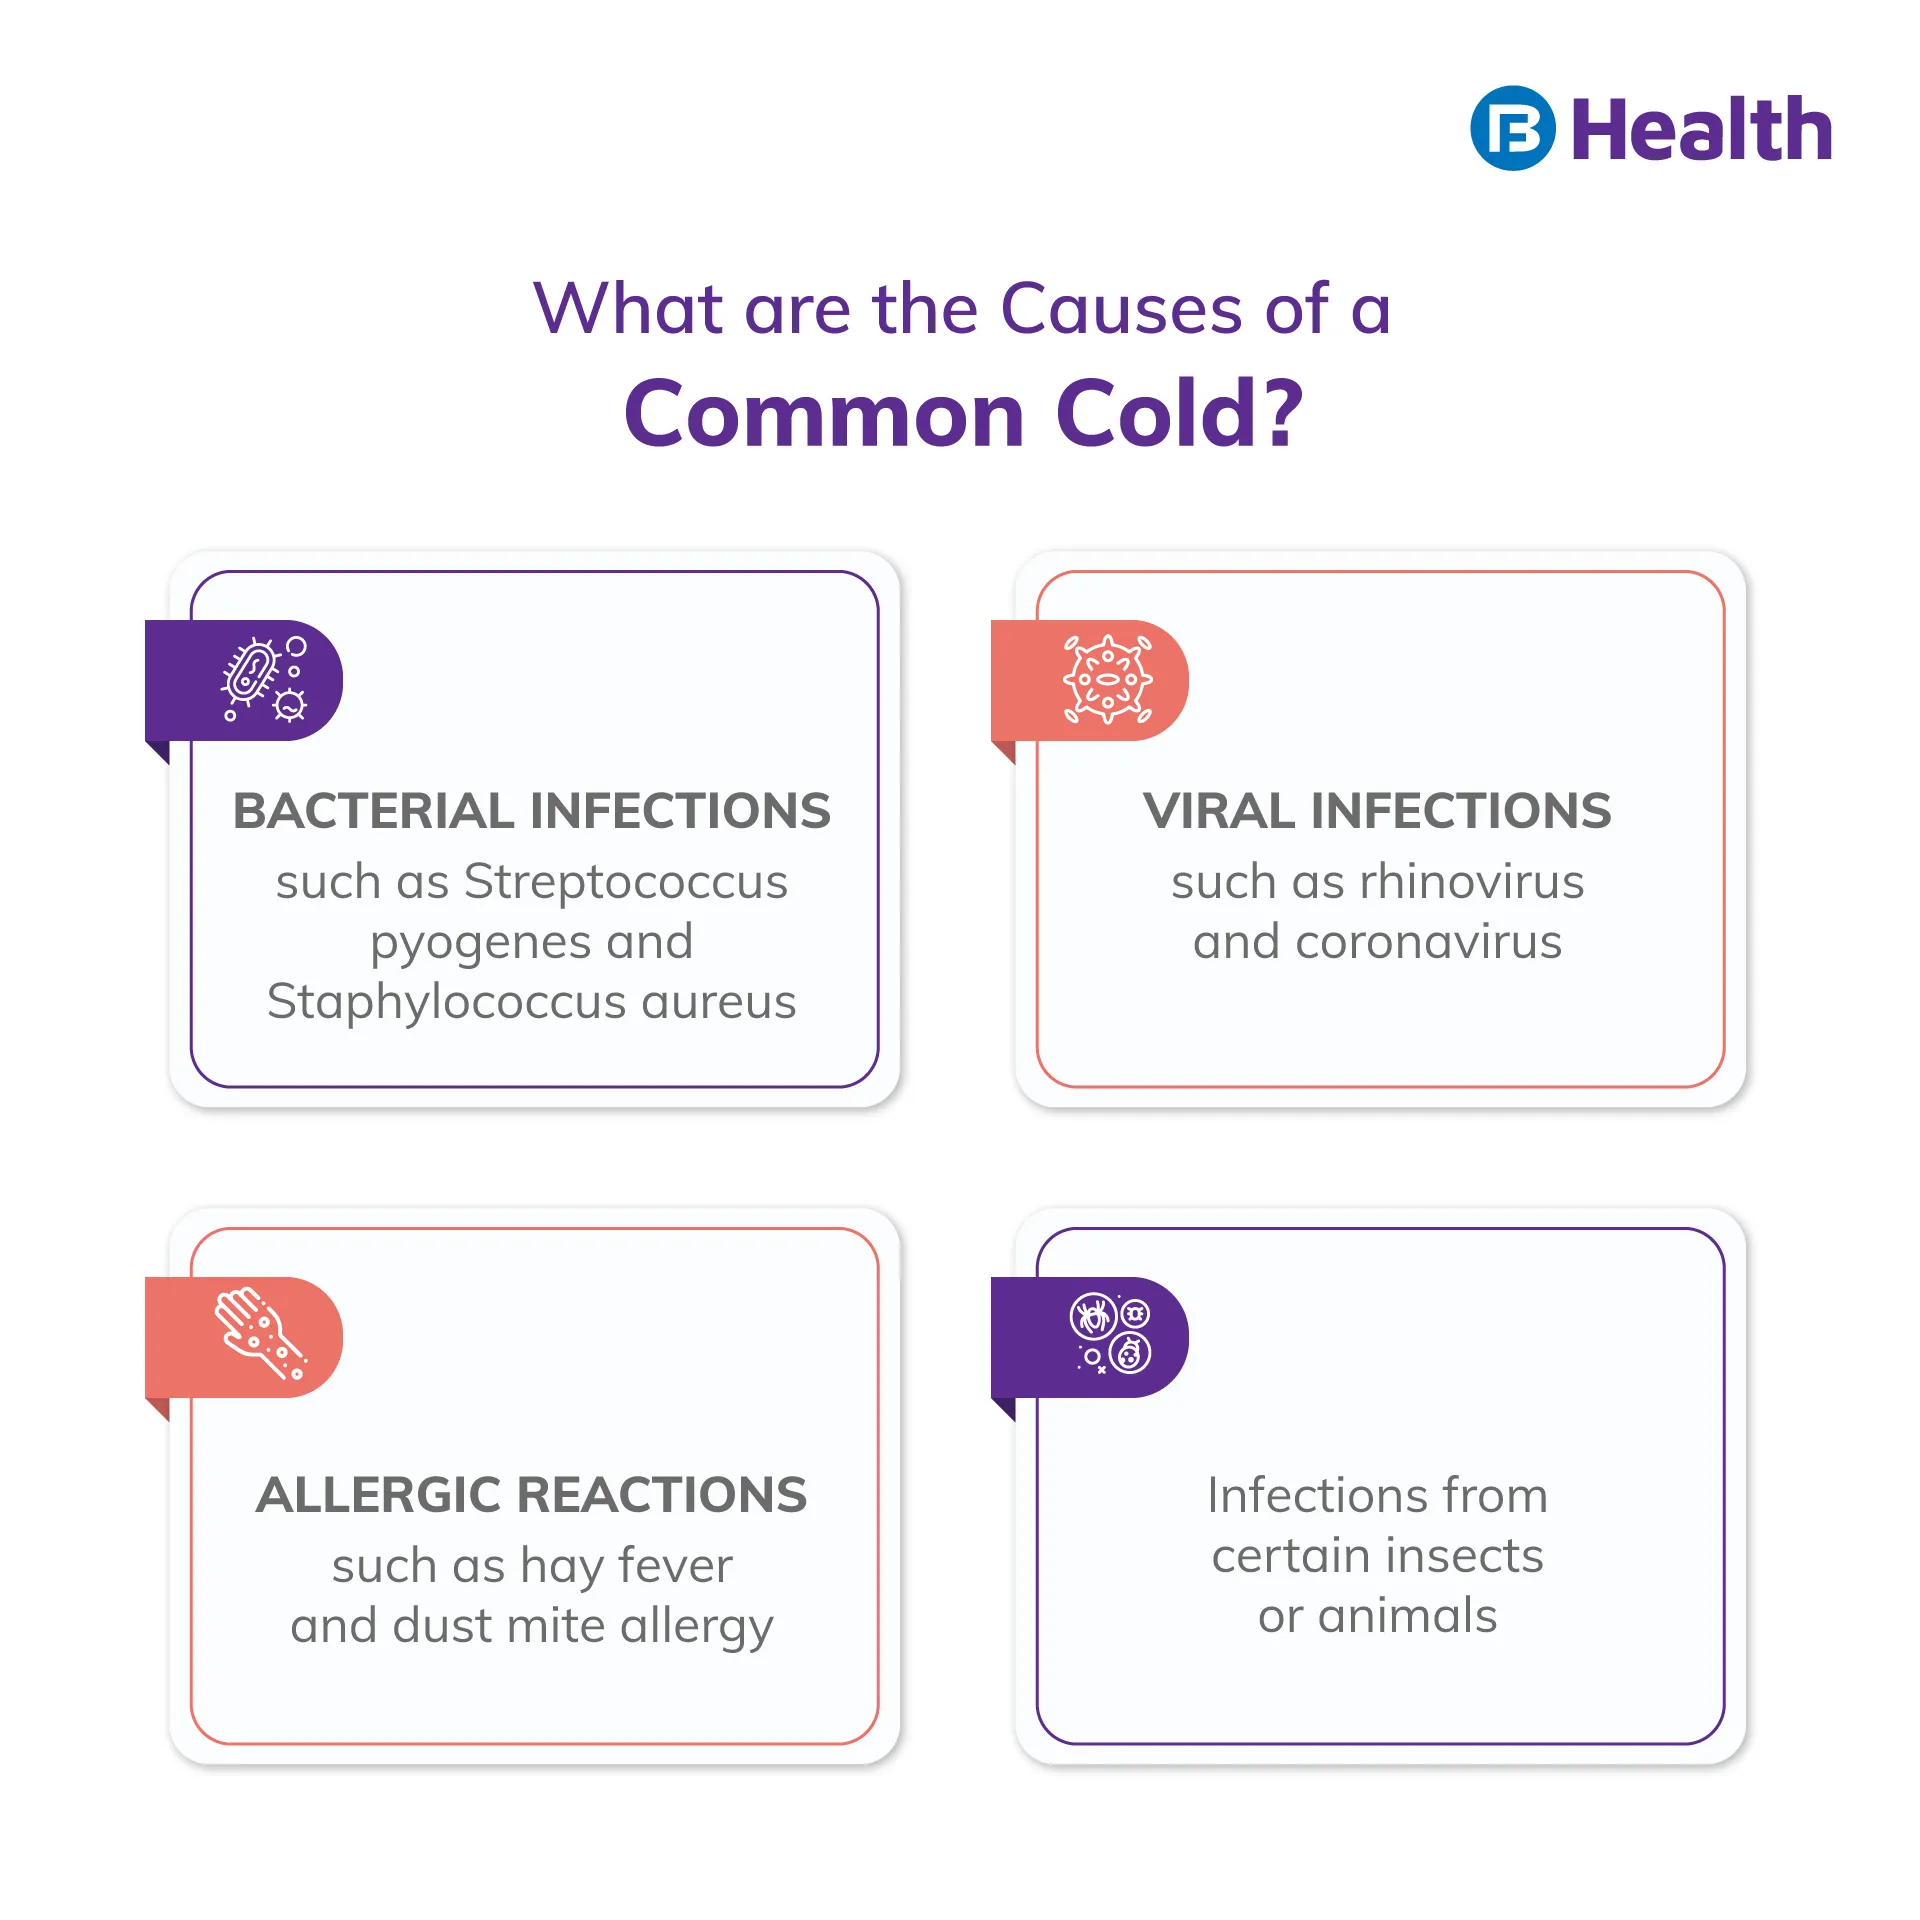 what are the causes of Common Cold